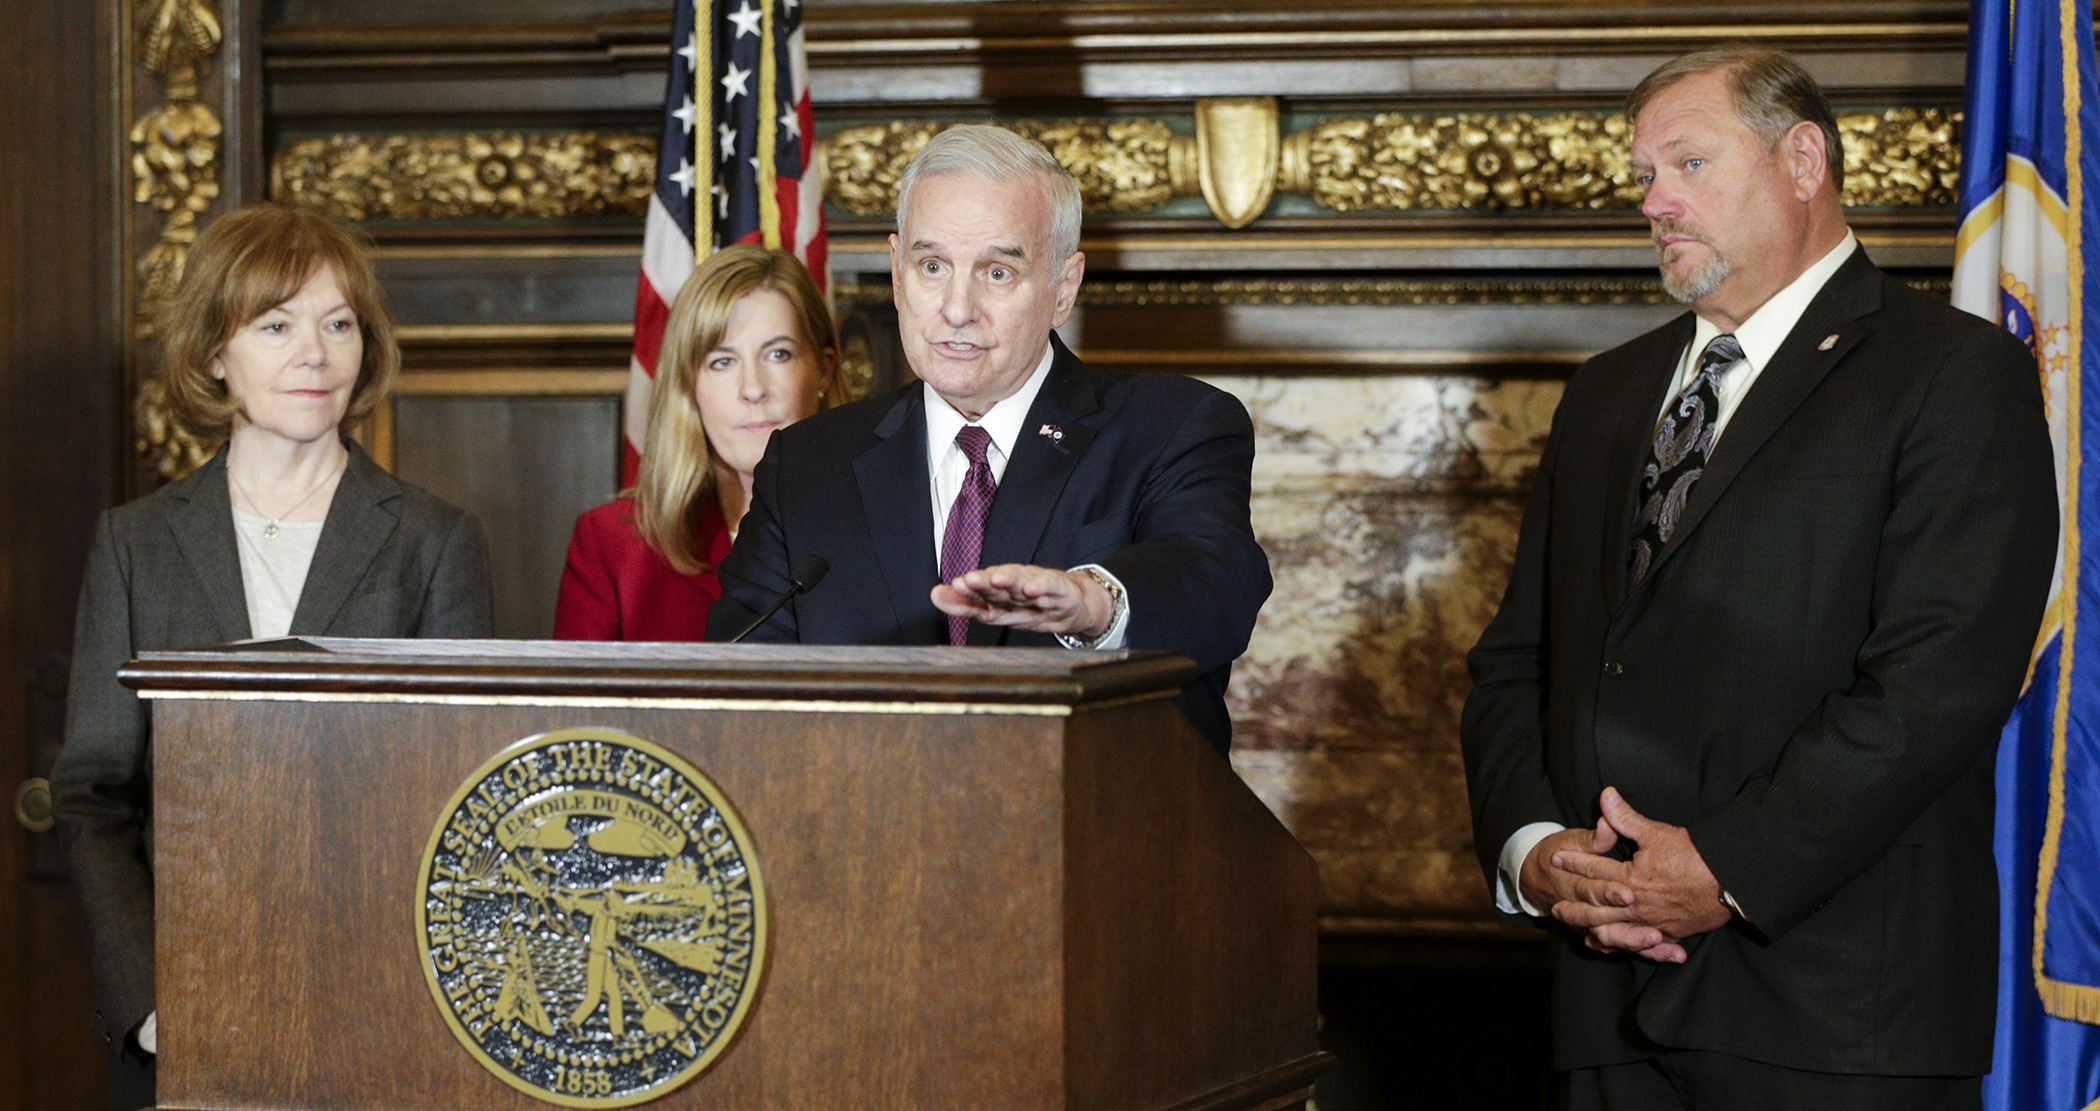 Gov. Mark Dayton addresses the media following a budget negotiation meeting with legislative Republican leaders May 9. House Photography file photo